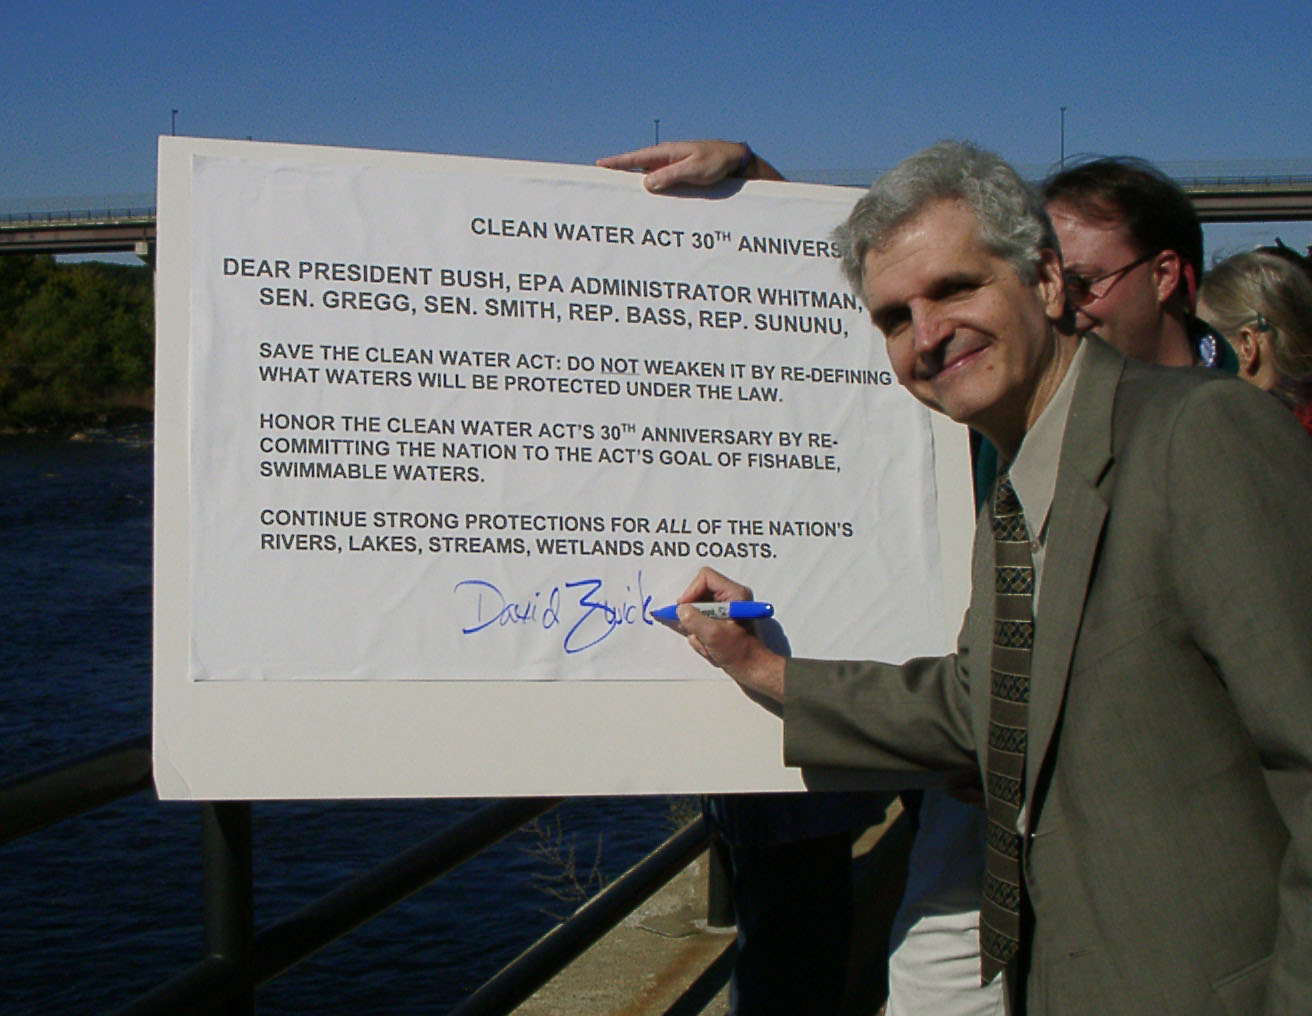 David Zwick Celebrating the 30th Anniversary of the Clean Water Act